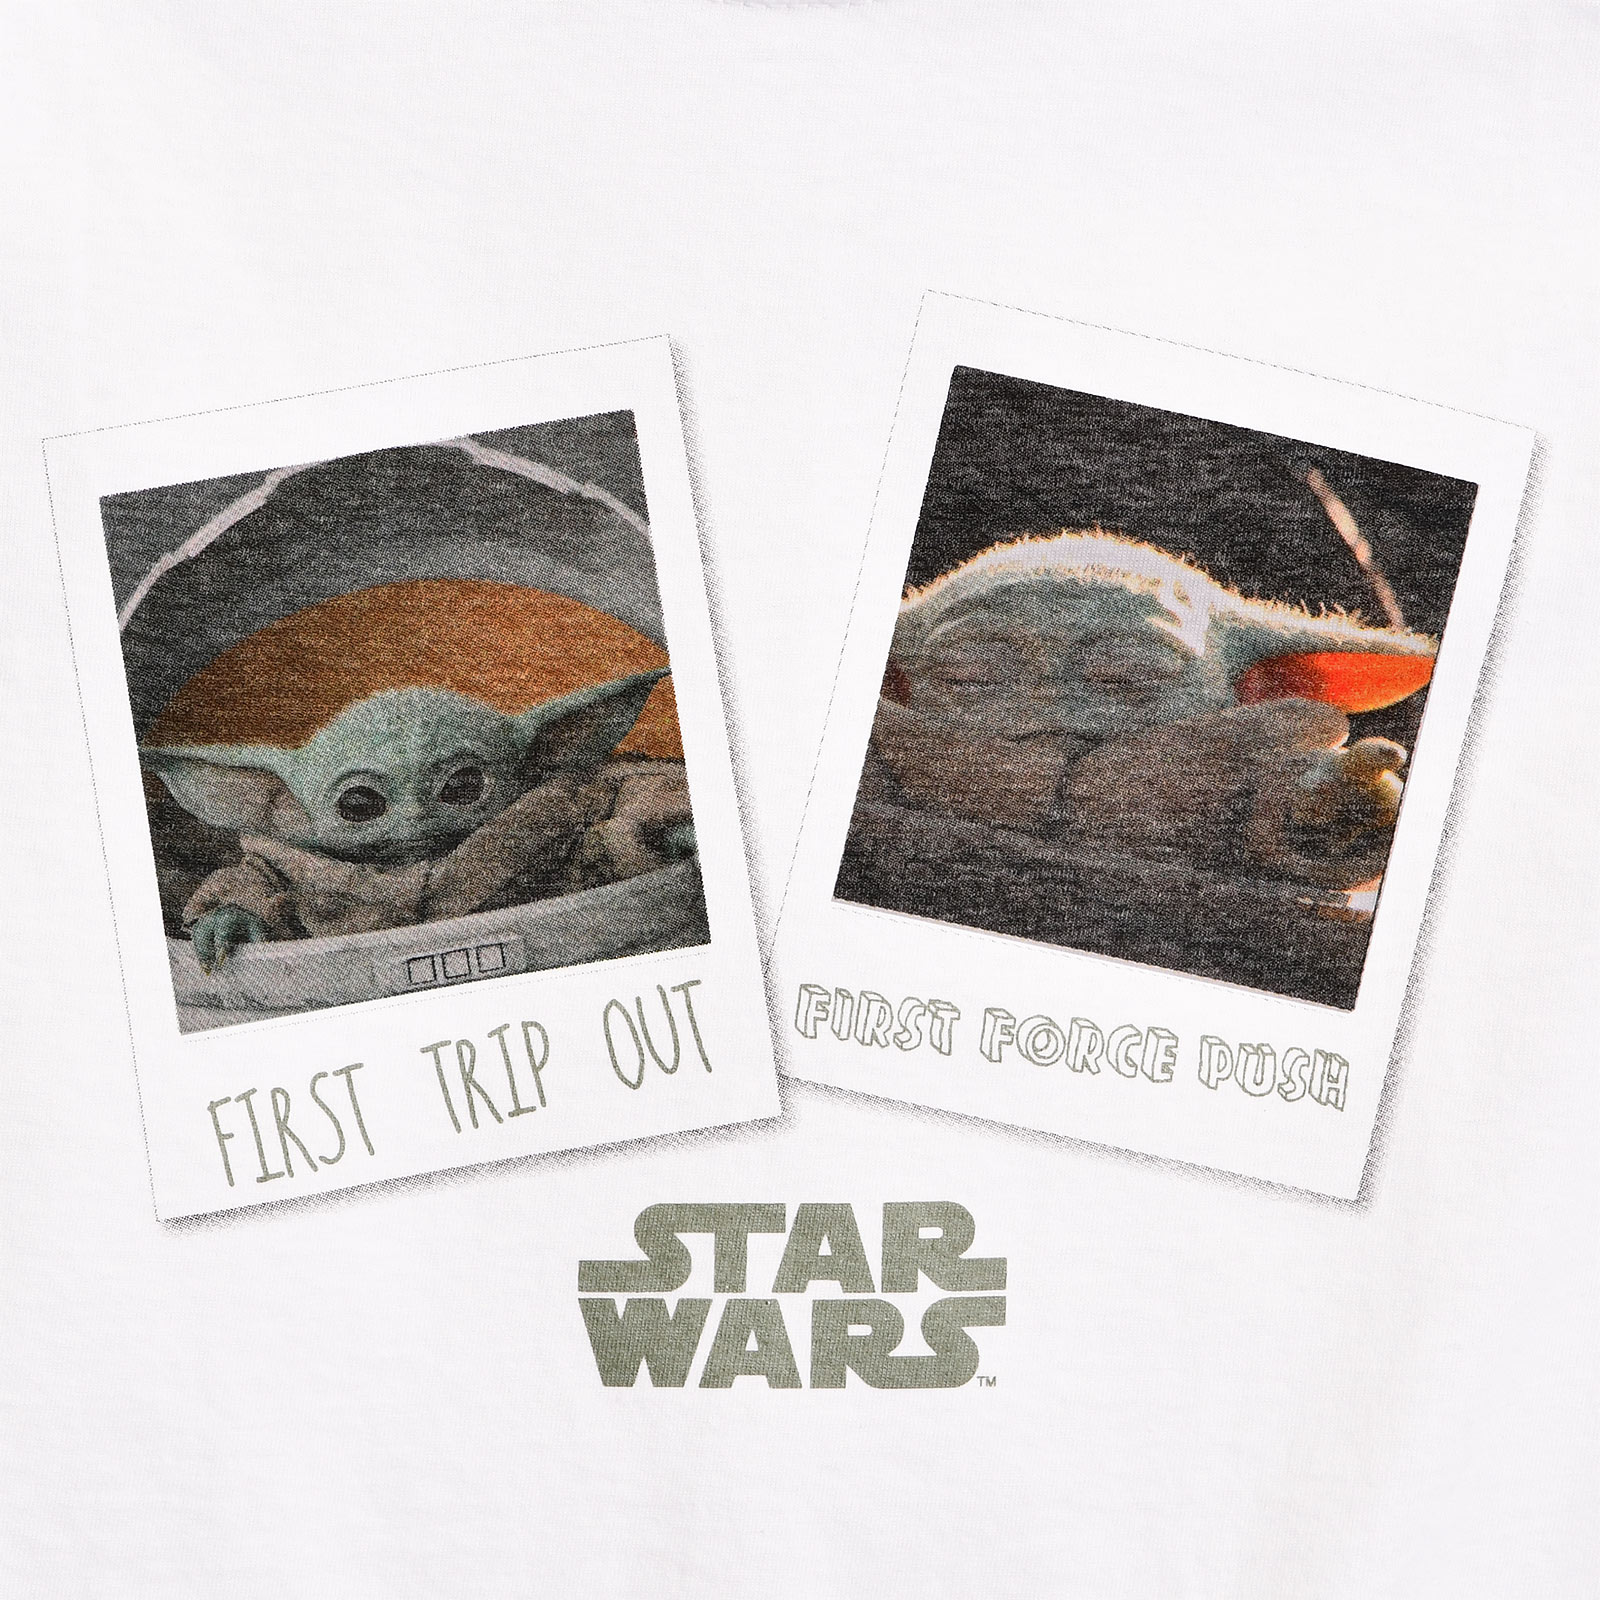 The Child First Day Out T-Shirt Kinder weiß - Star Wars The Mandalorian